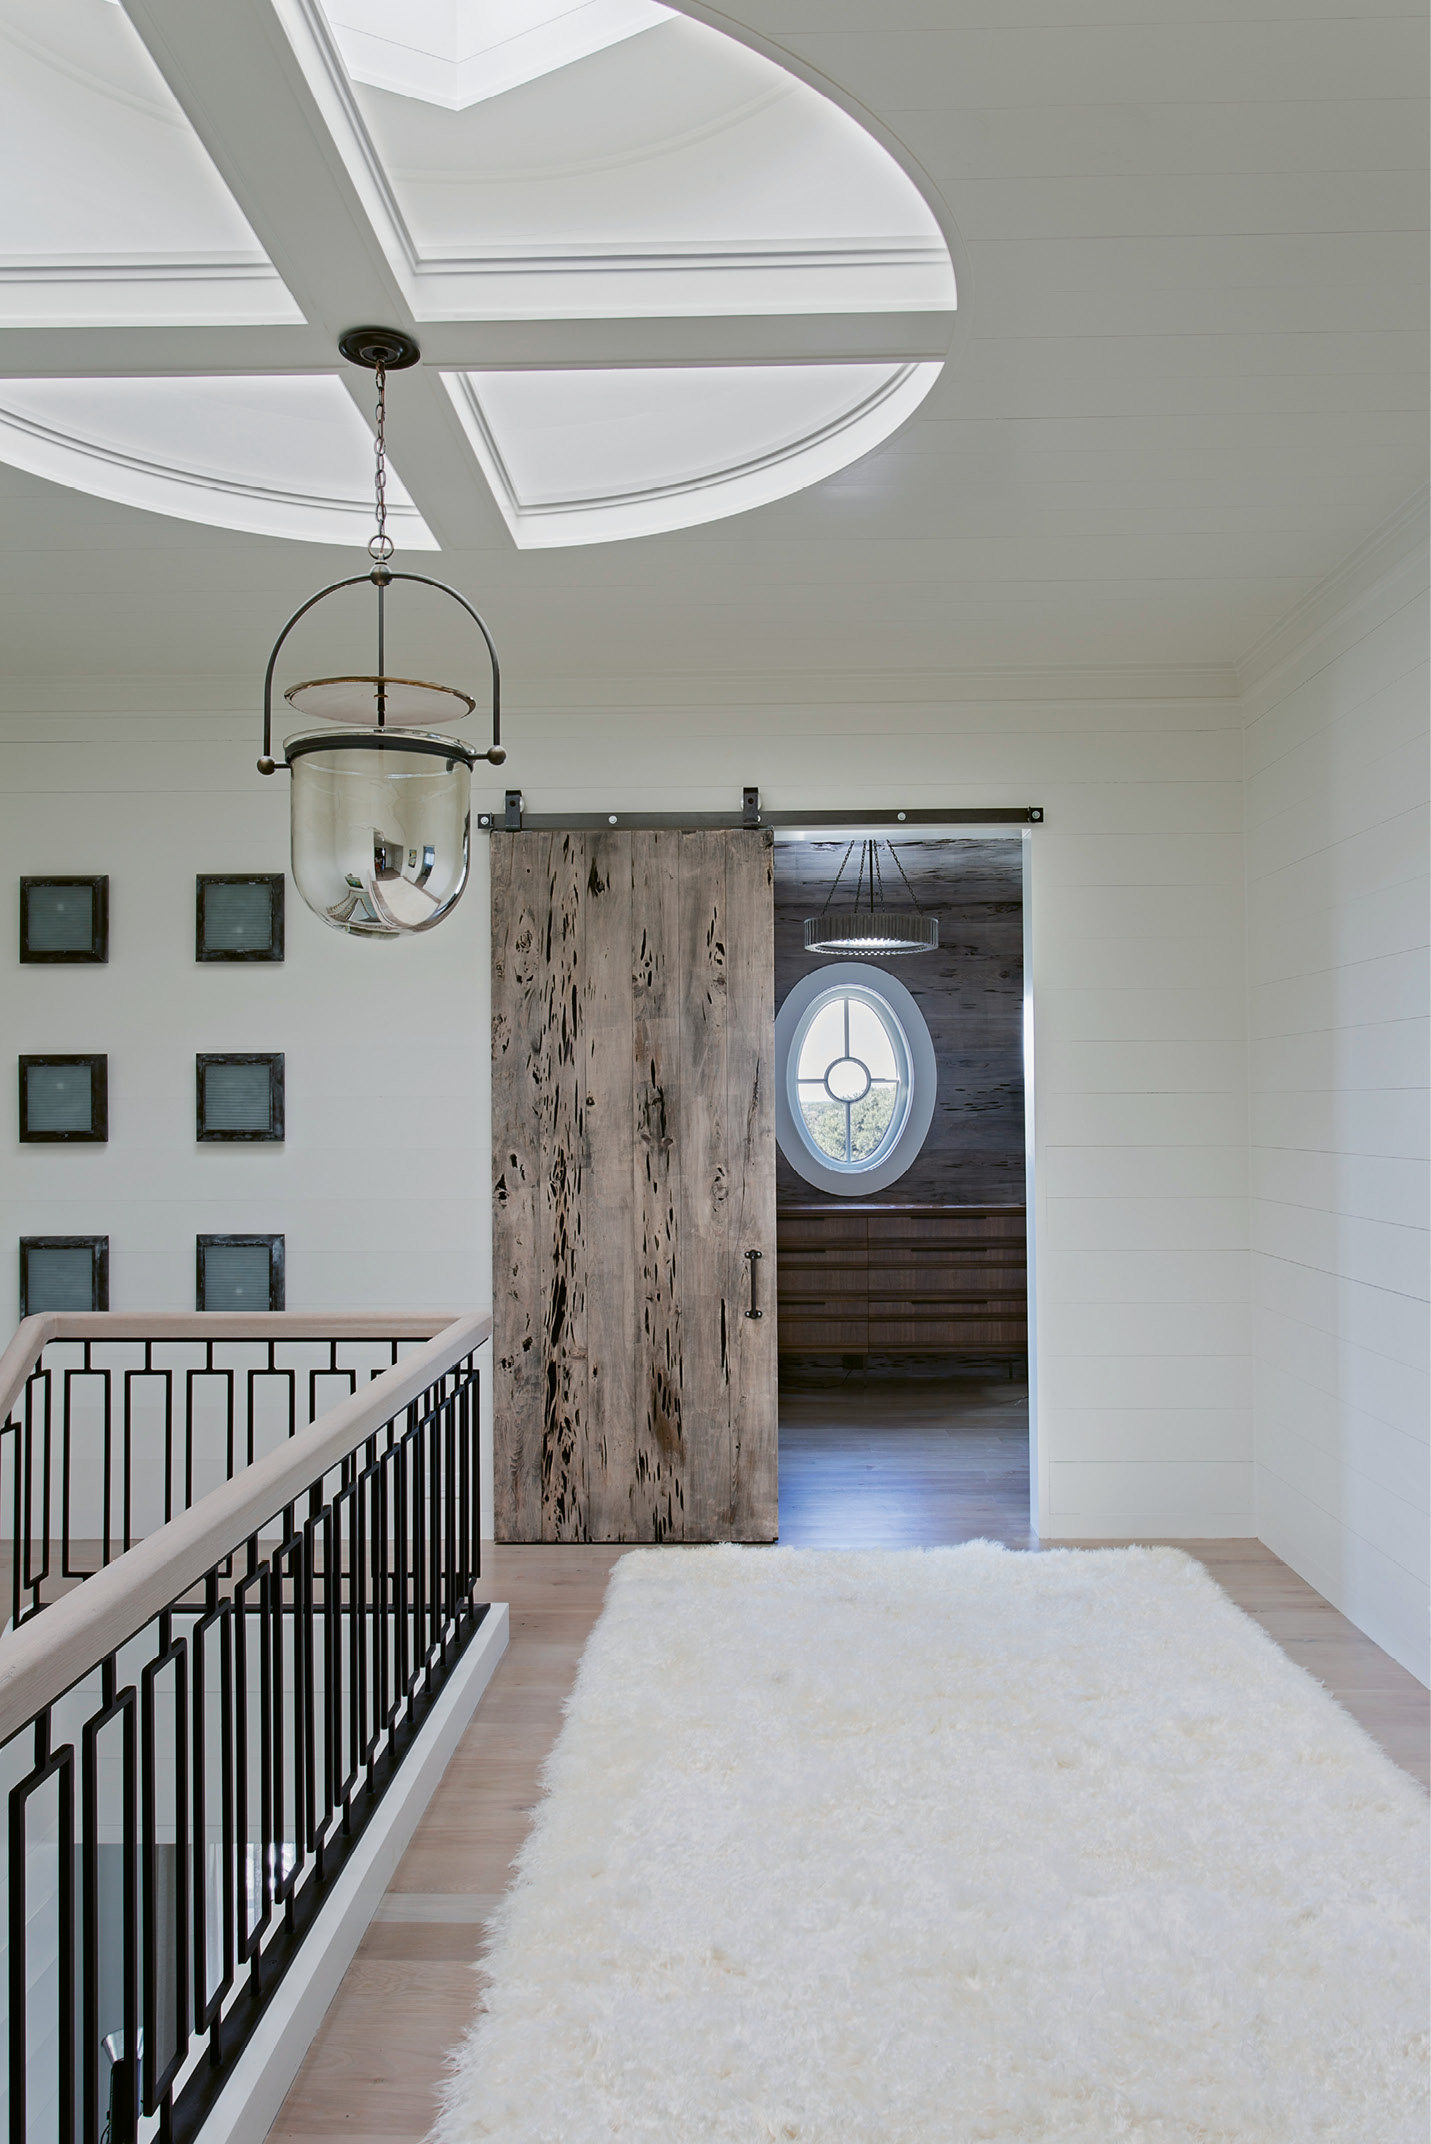 Haute Hallway: A medallion-shaped skylight presides over this second-floor hallway with a custom stair rail designed by David Smith.